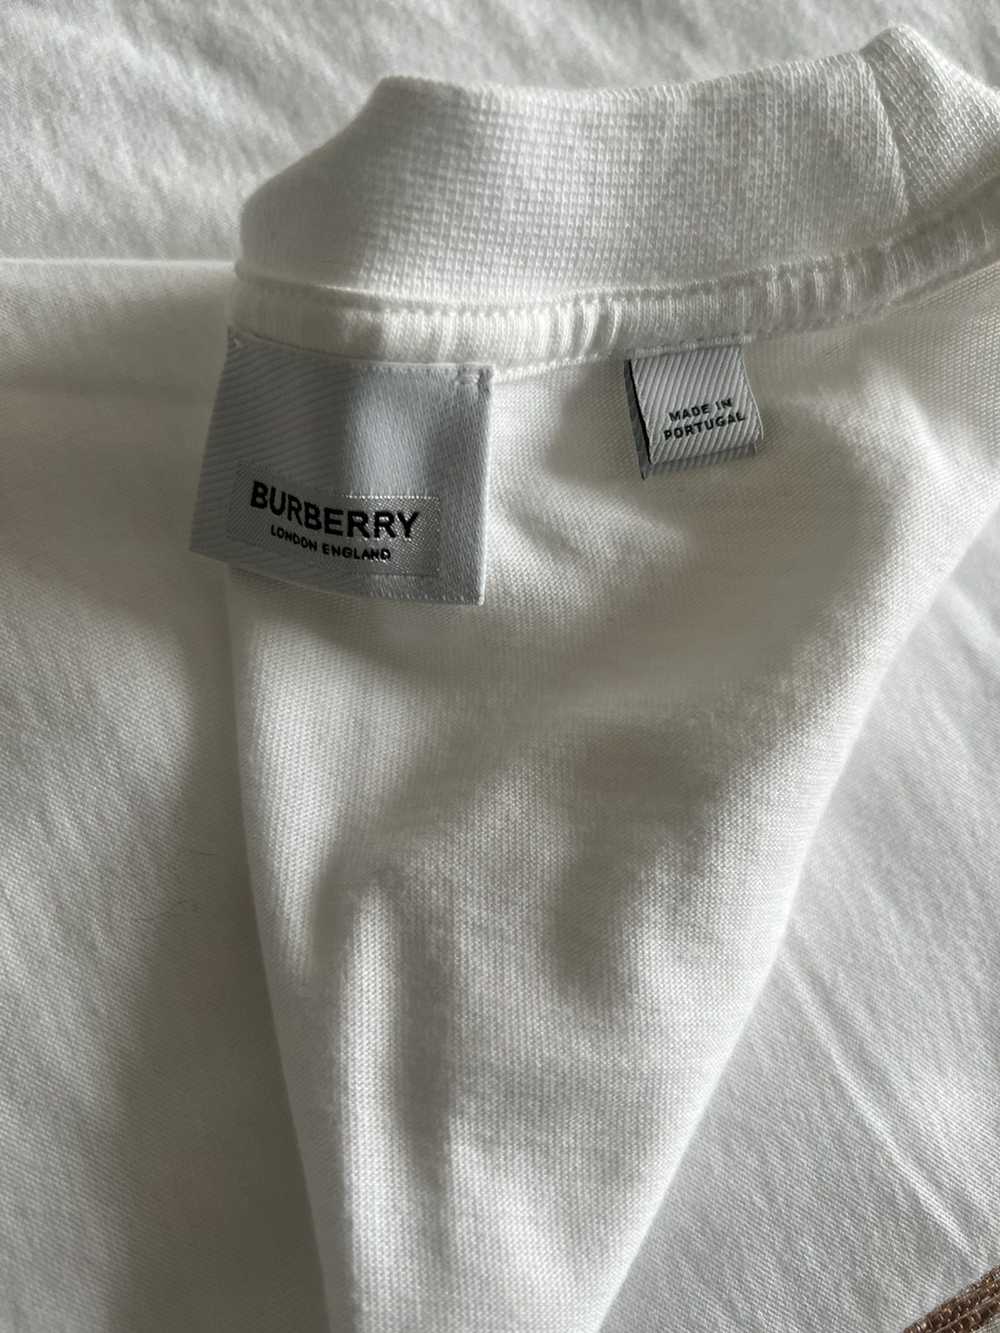 Burberry Burberry t shirt dry clean no stains wor… - image 8